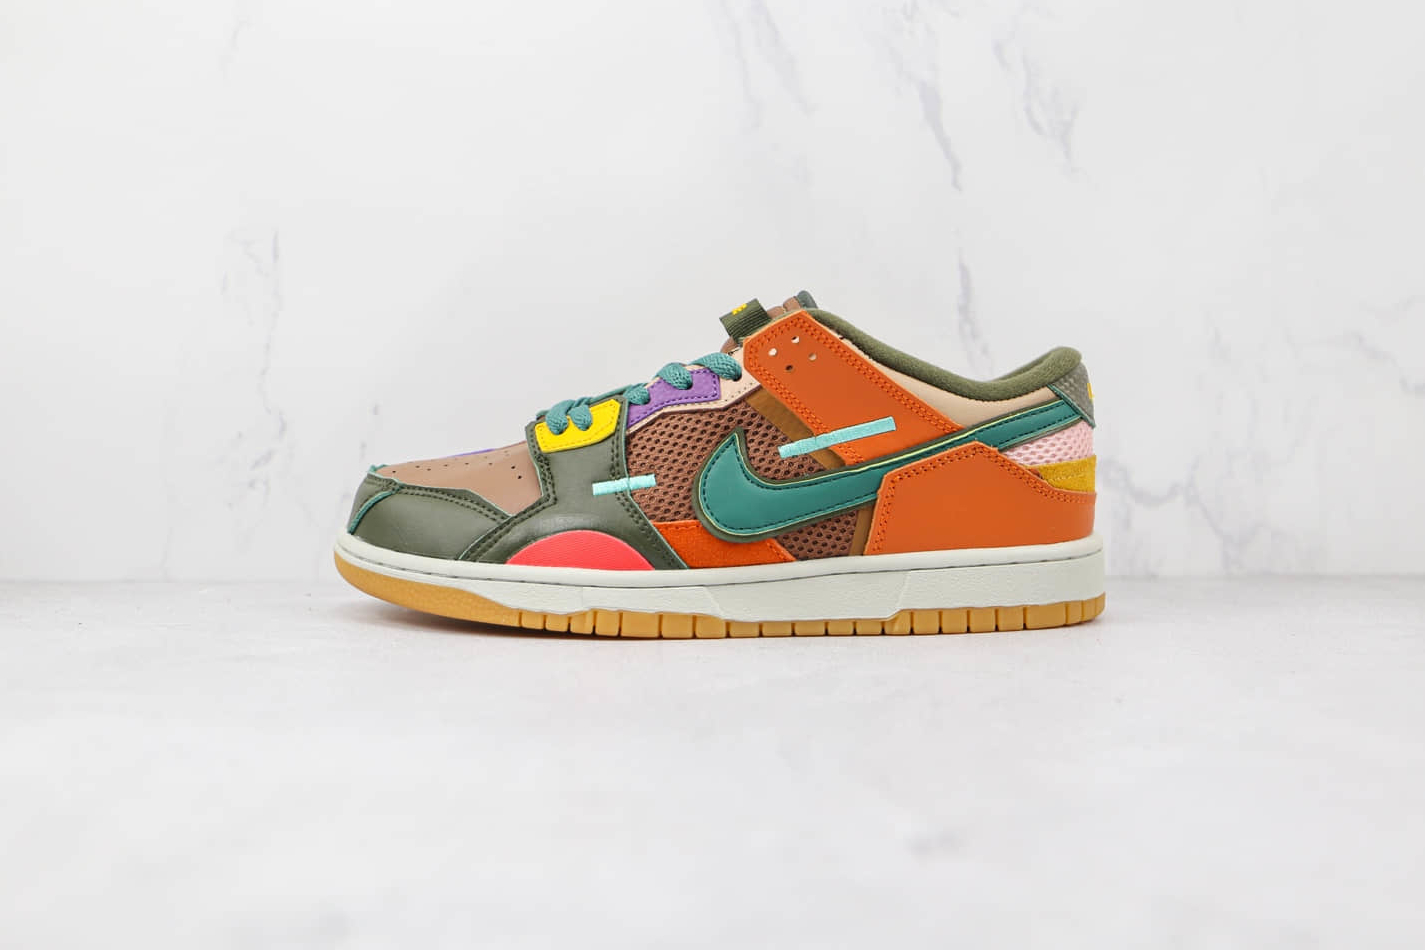 Nike Dunk Low 'Scrap' DB0500-200 - Urban Style Sneakers for Sale